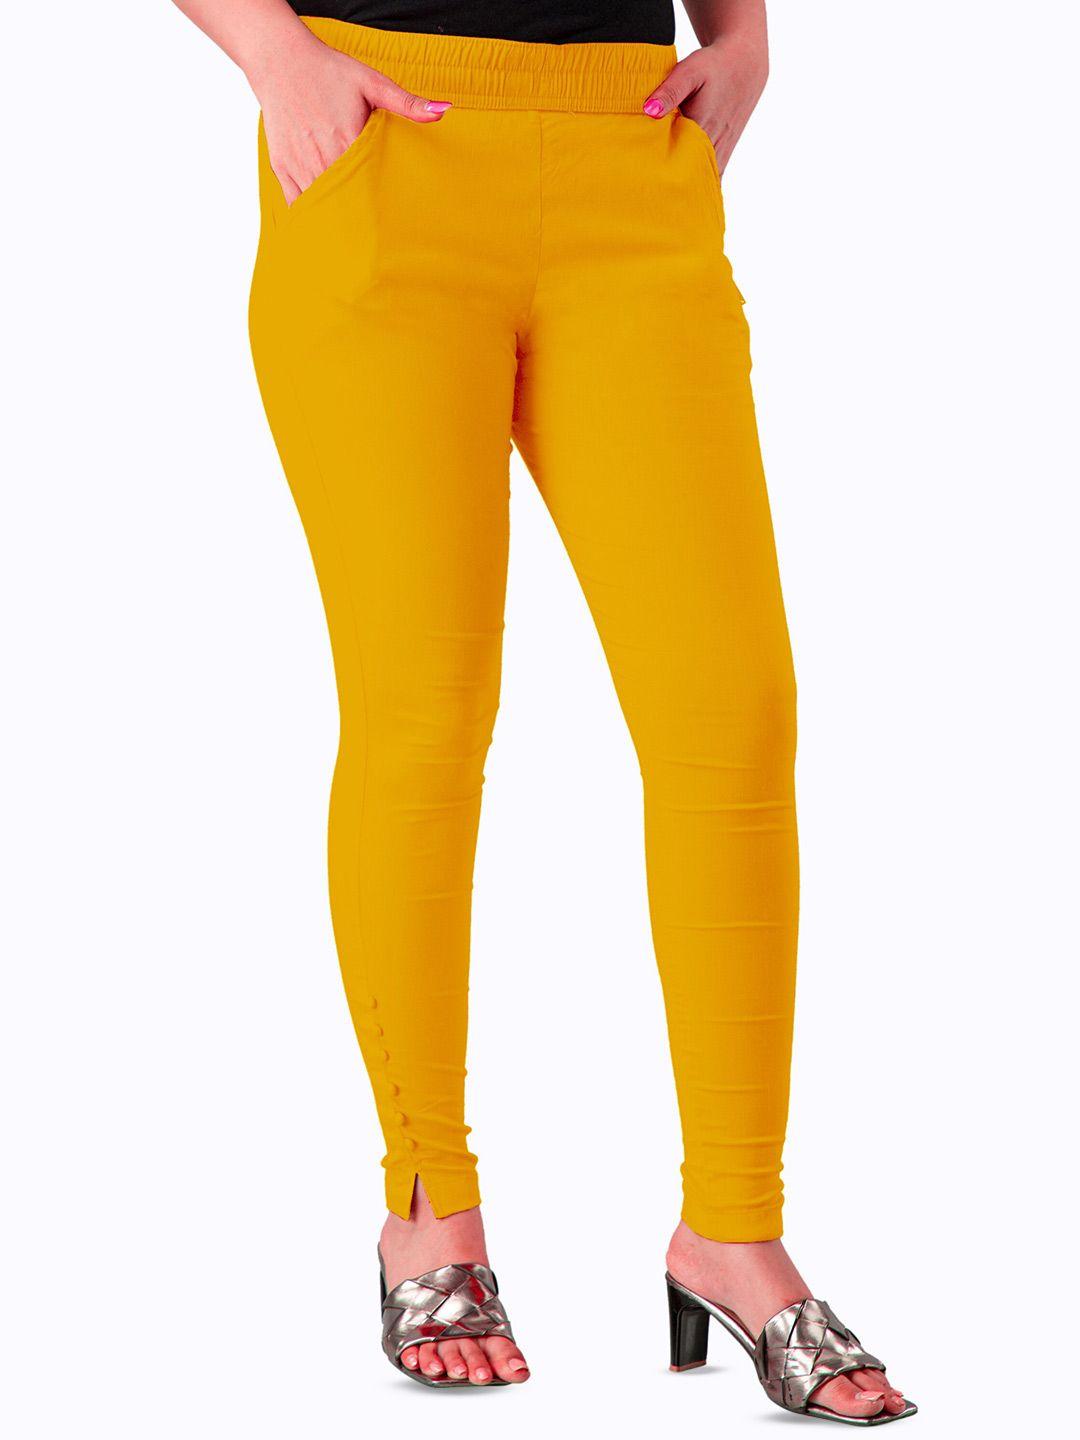 baesd-stretchable-relaxed-fit-regular-jeggings